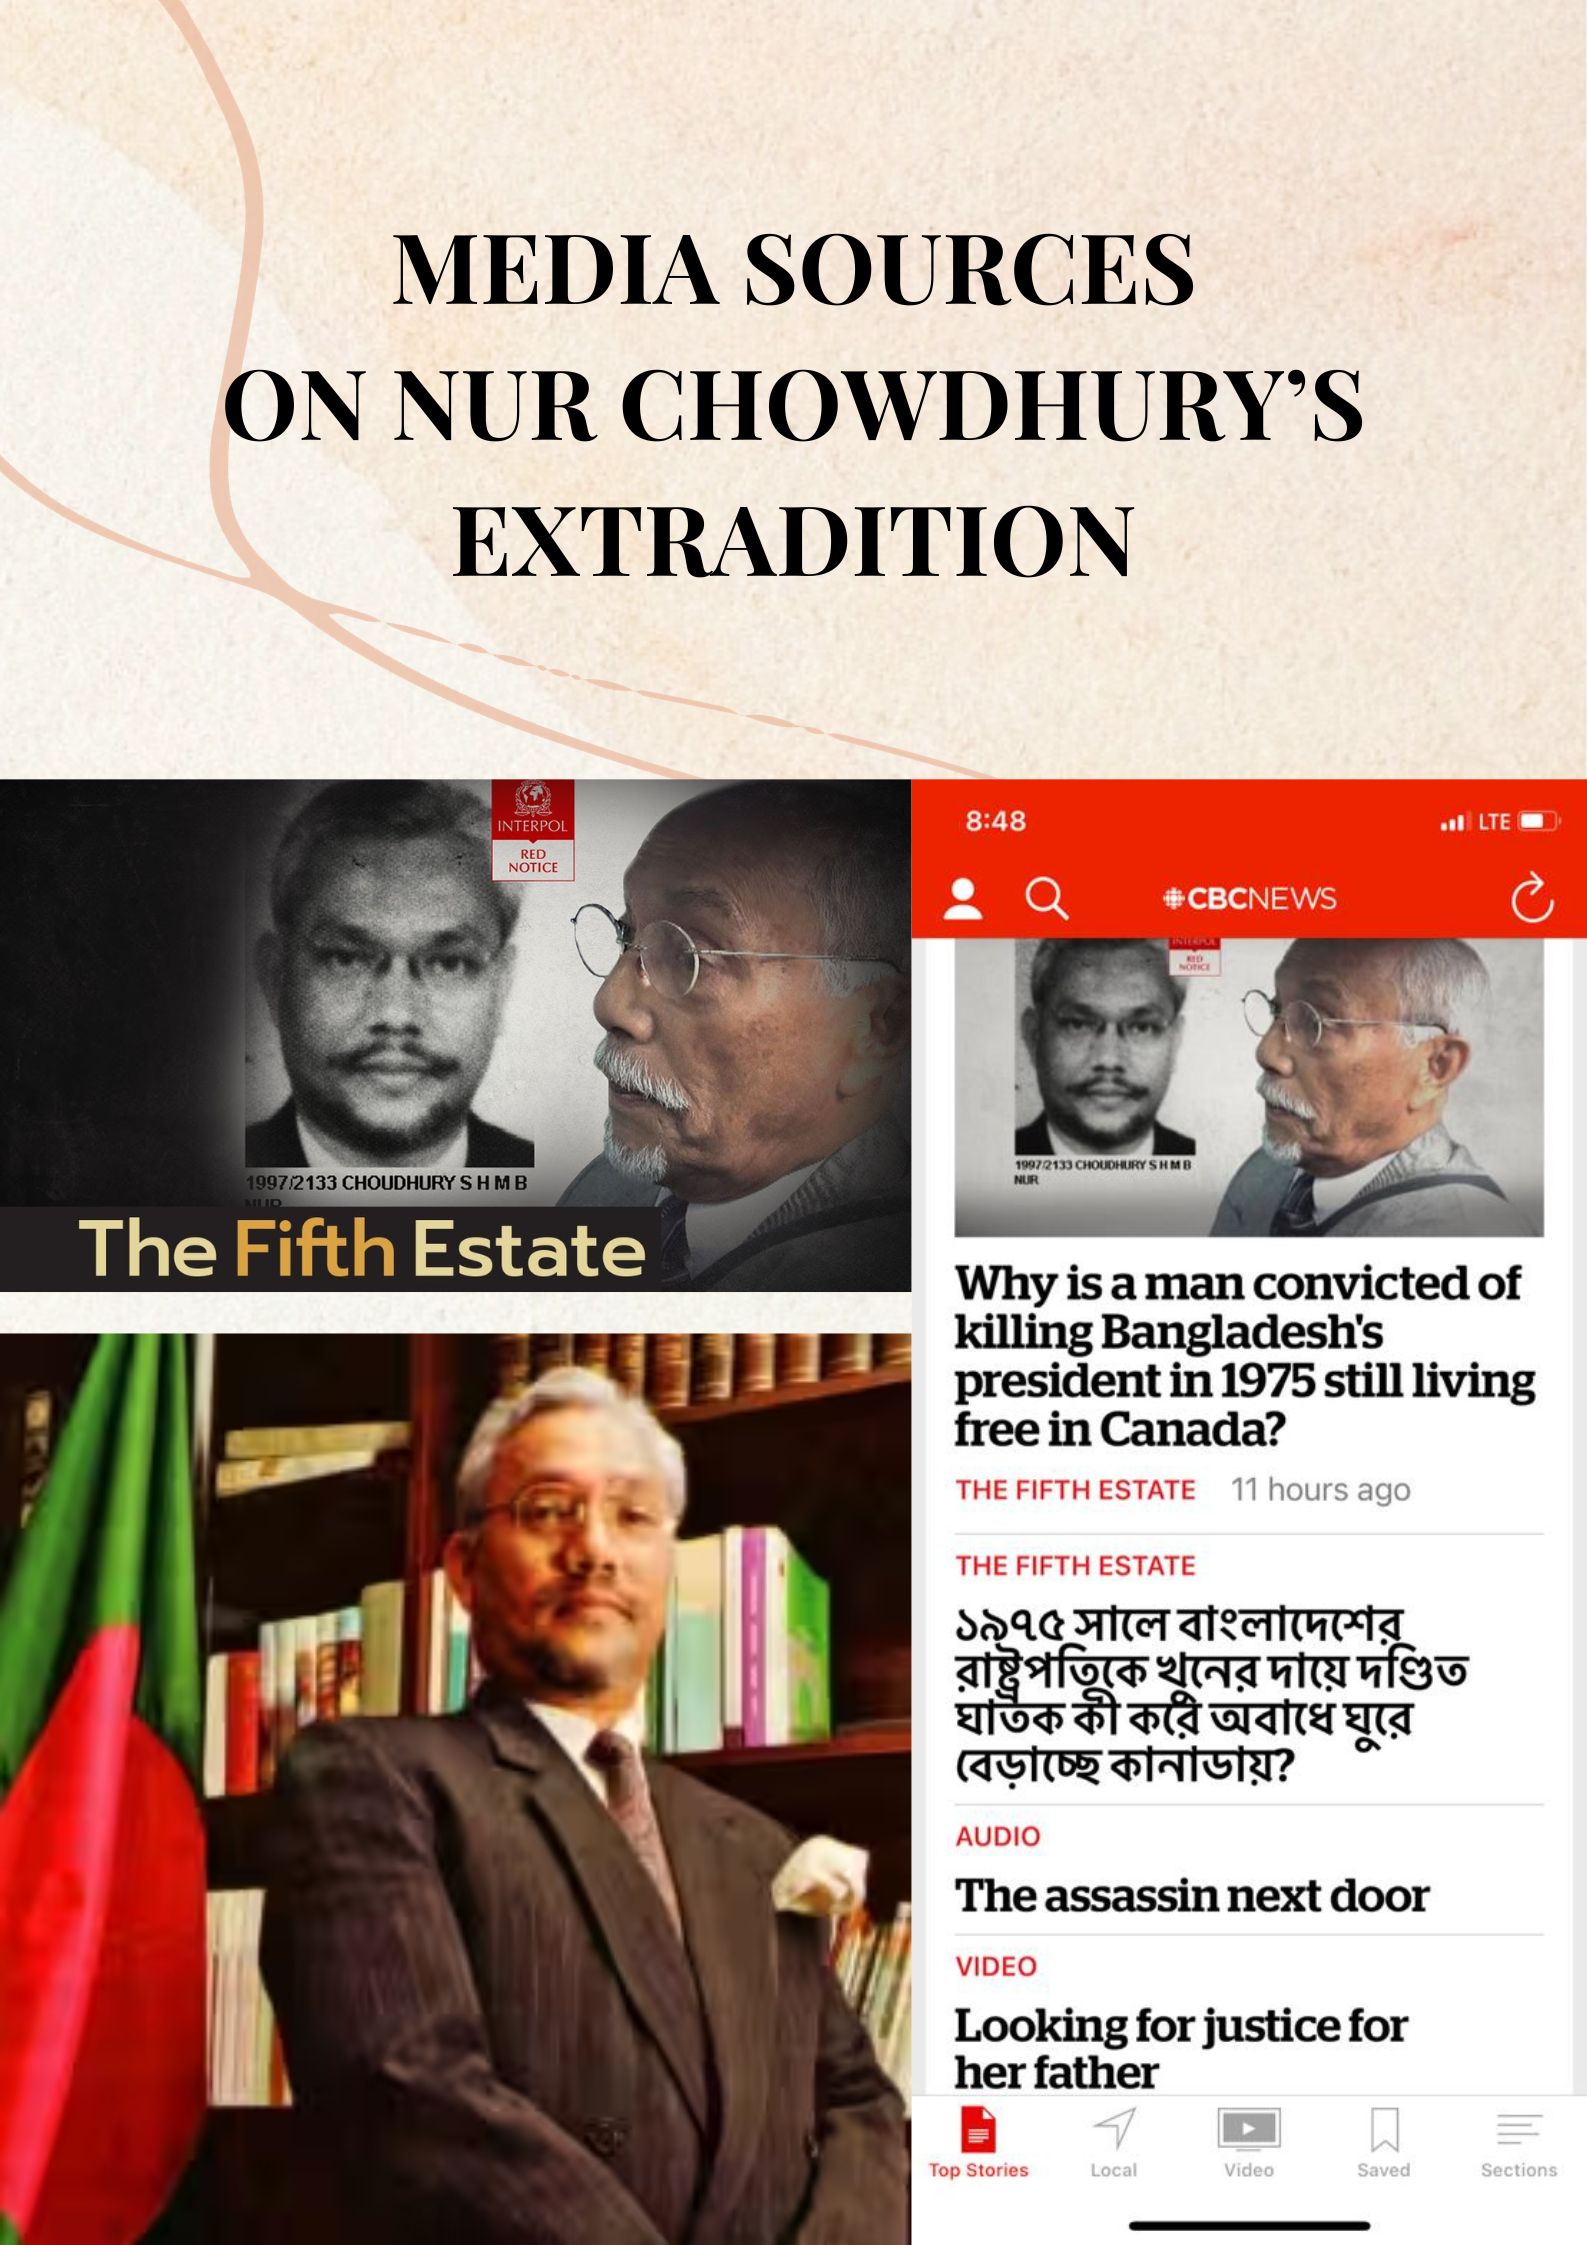 Nur Chowdhury extradition related media sources